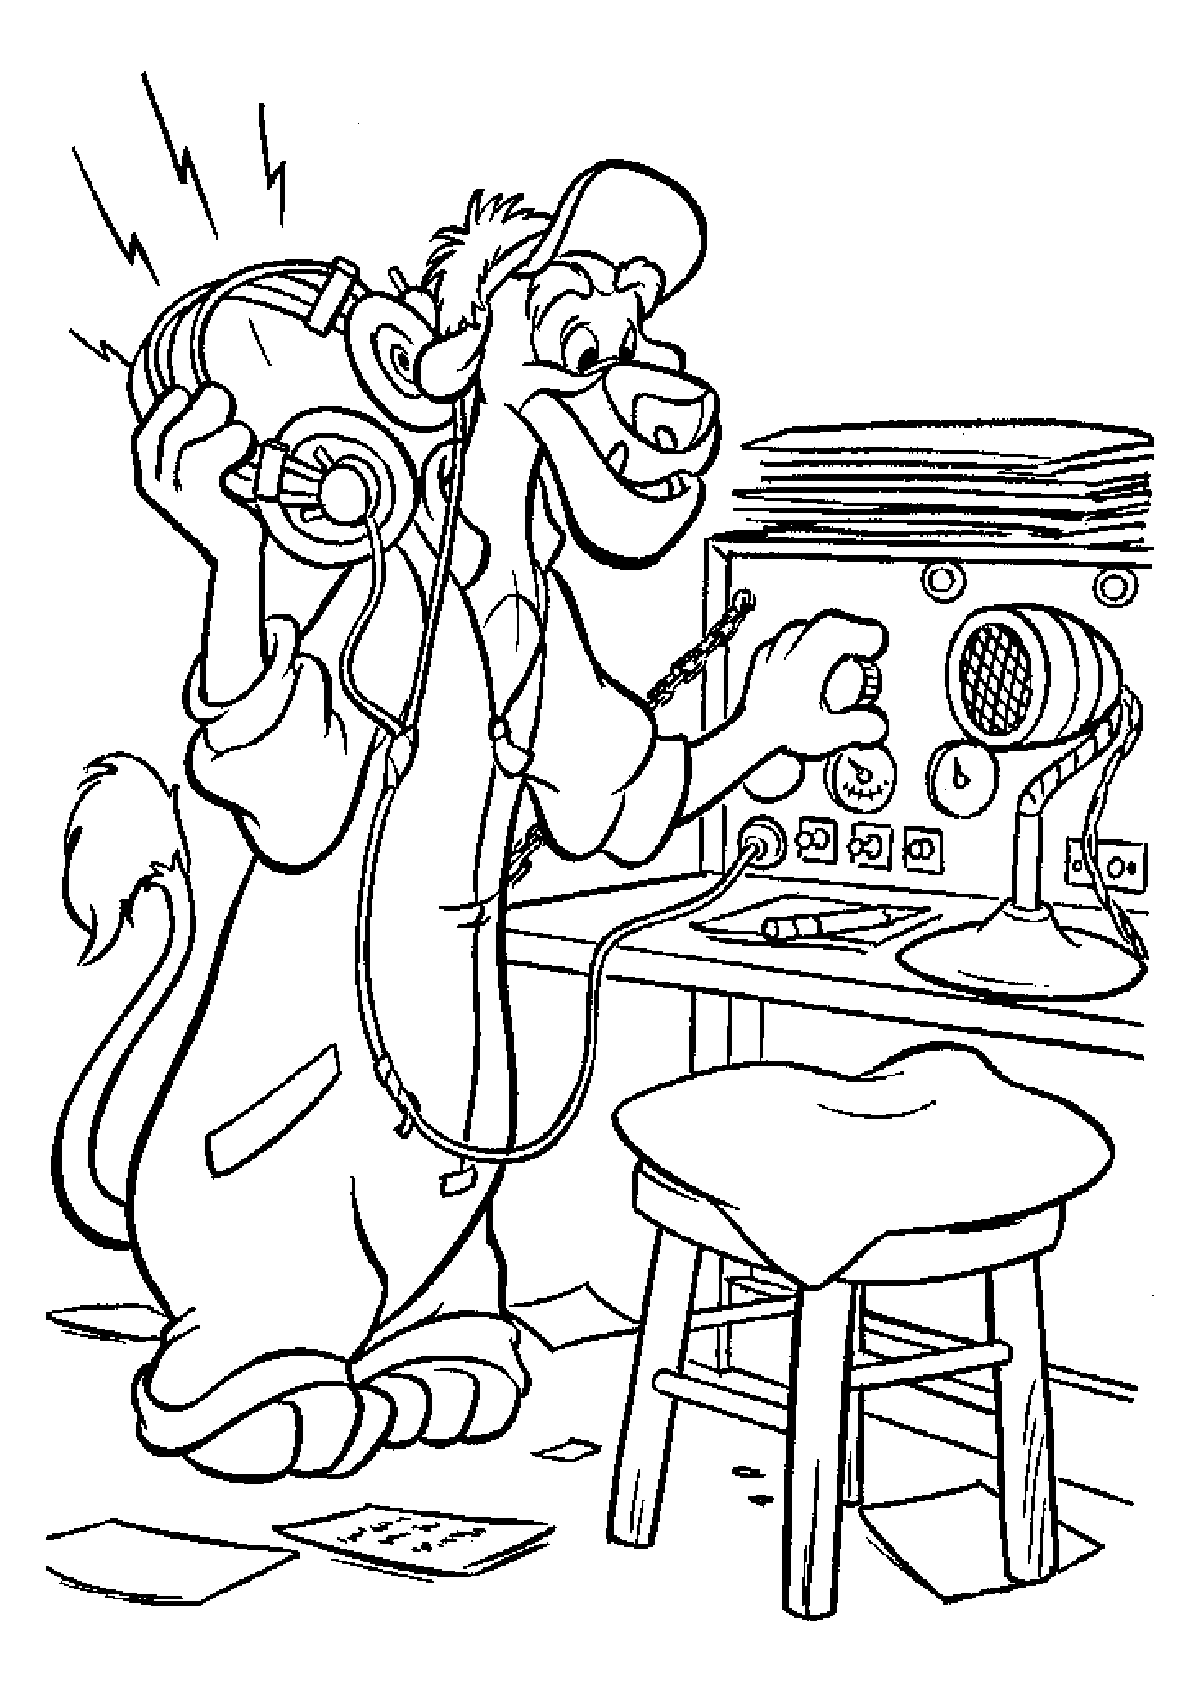 coloring talespin spin radio wildcat tale listening cartoons